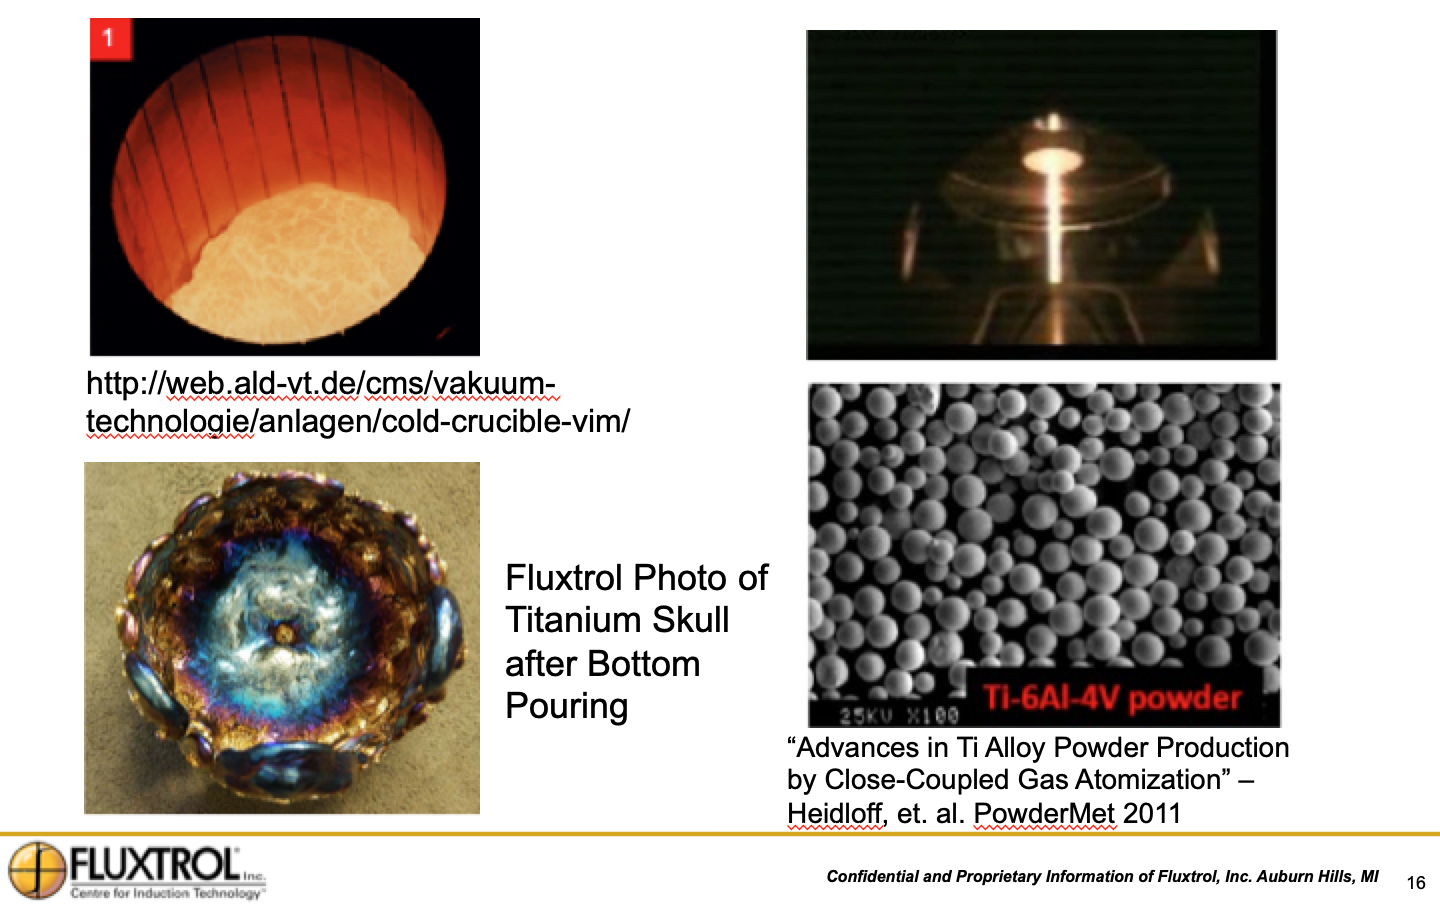 Fluxtrol | Applications of Induction Heating Enabling Advancement in Materials Science Figure 15 - Process Images